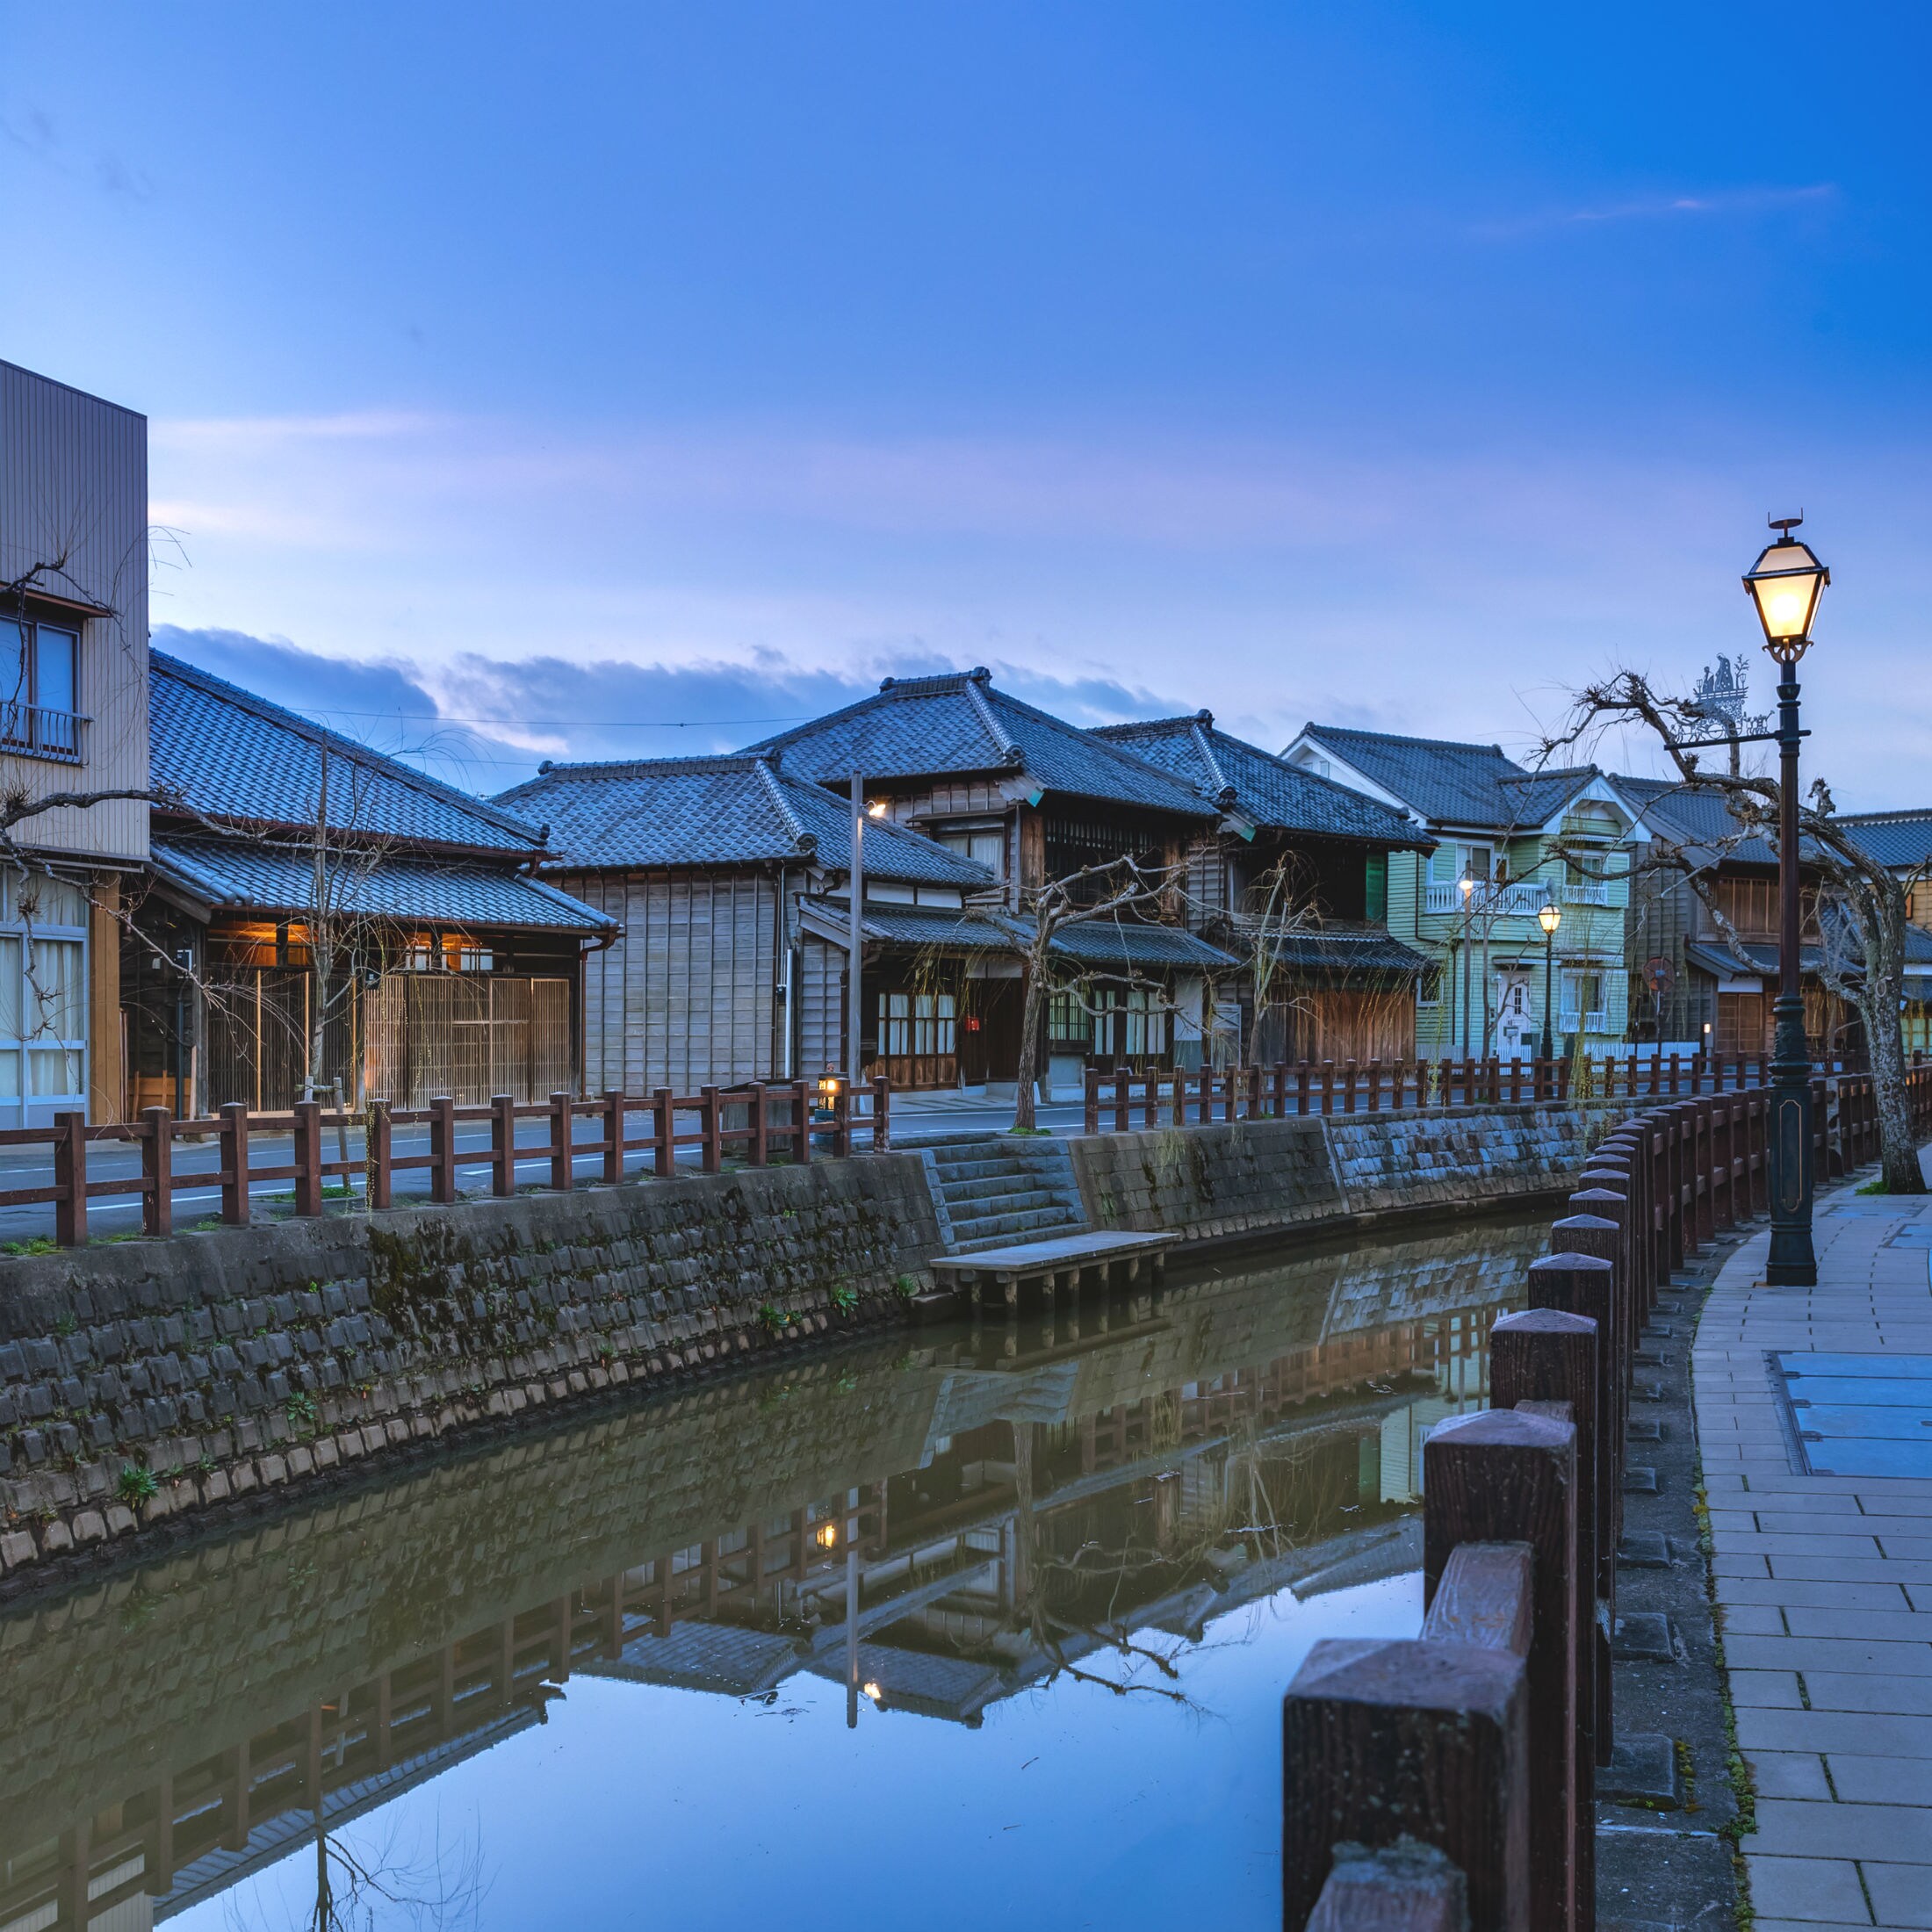 Sawara is the closest to Narita Airport and has the streets of Edo.